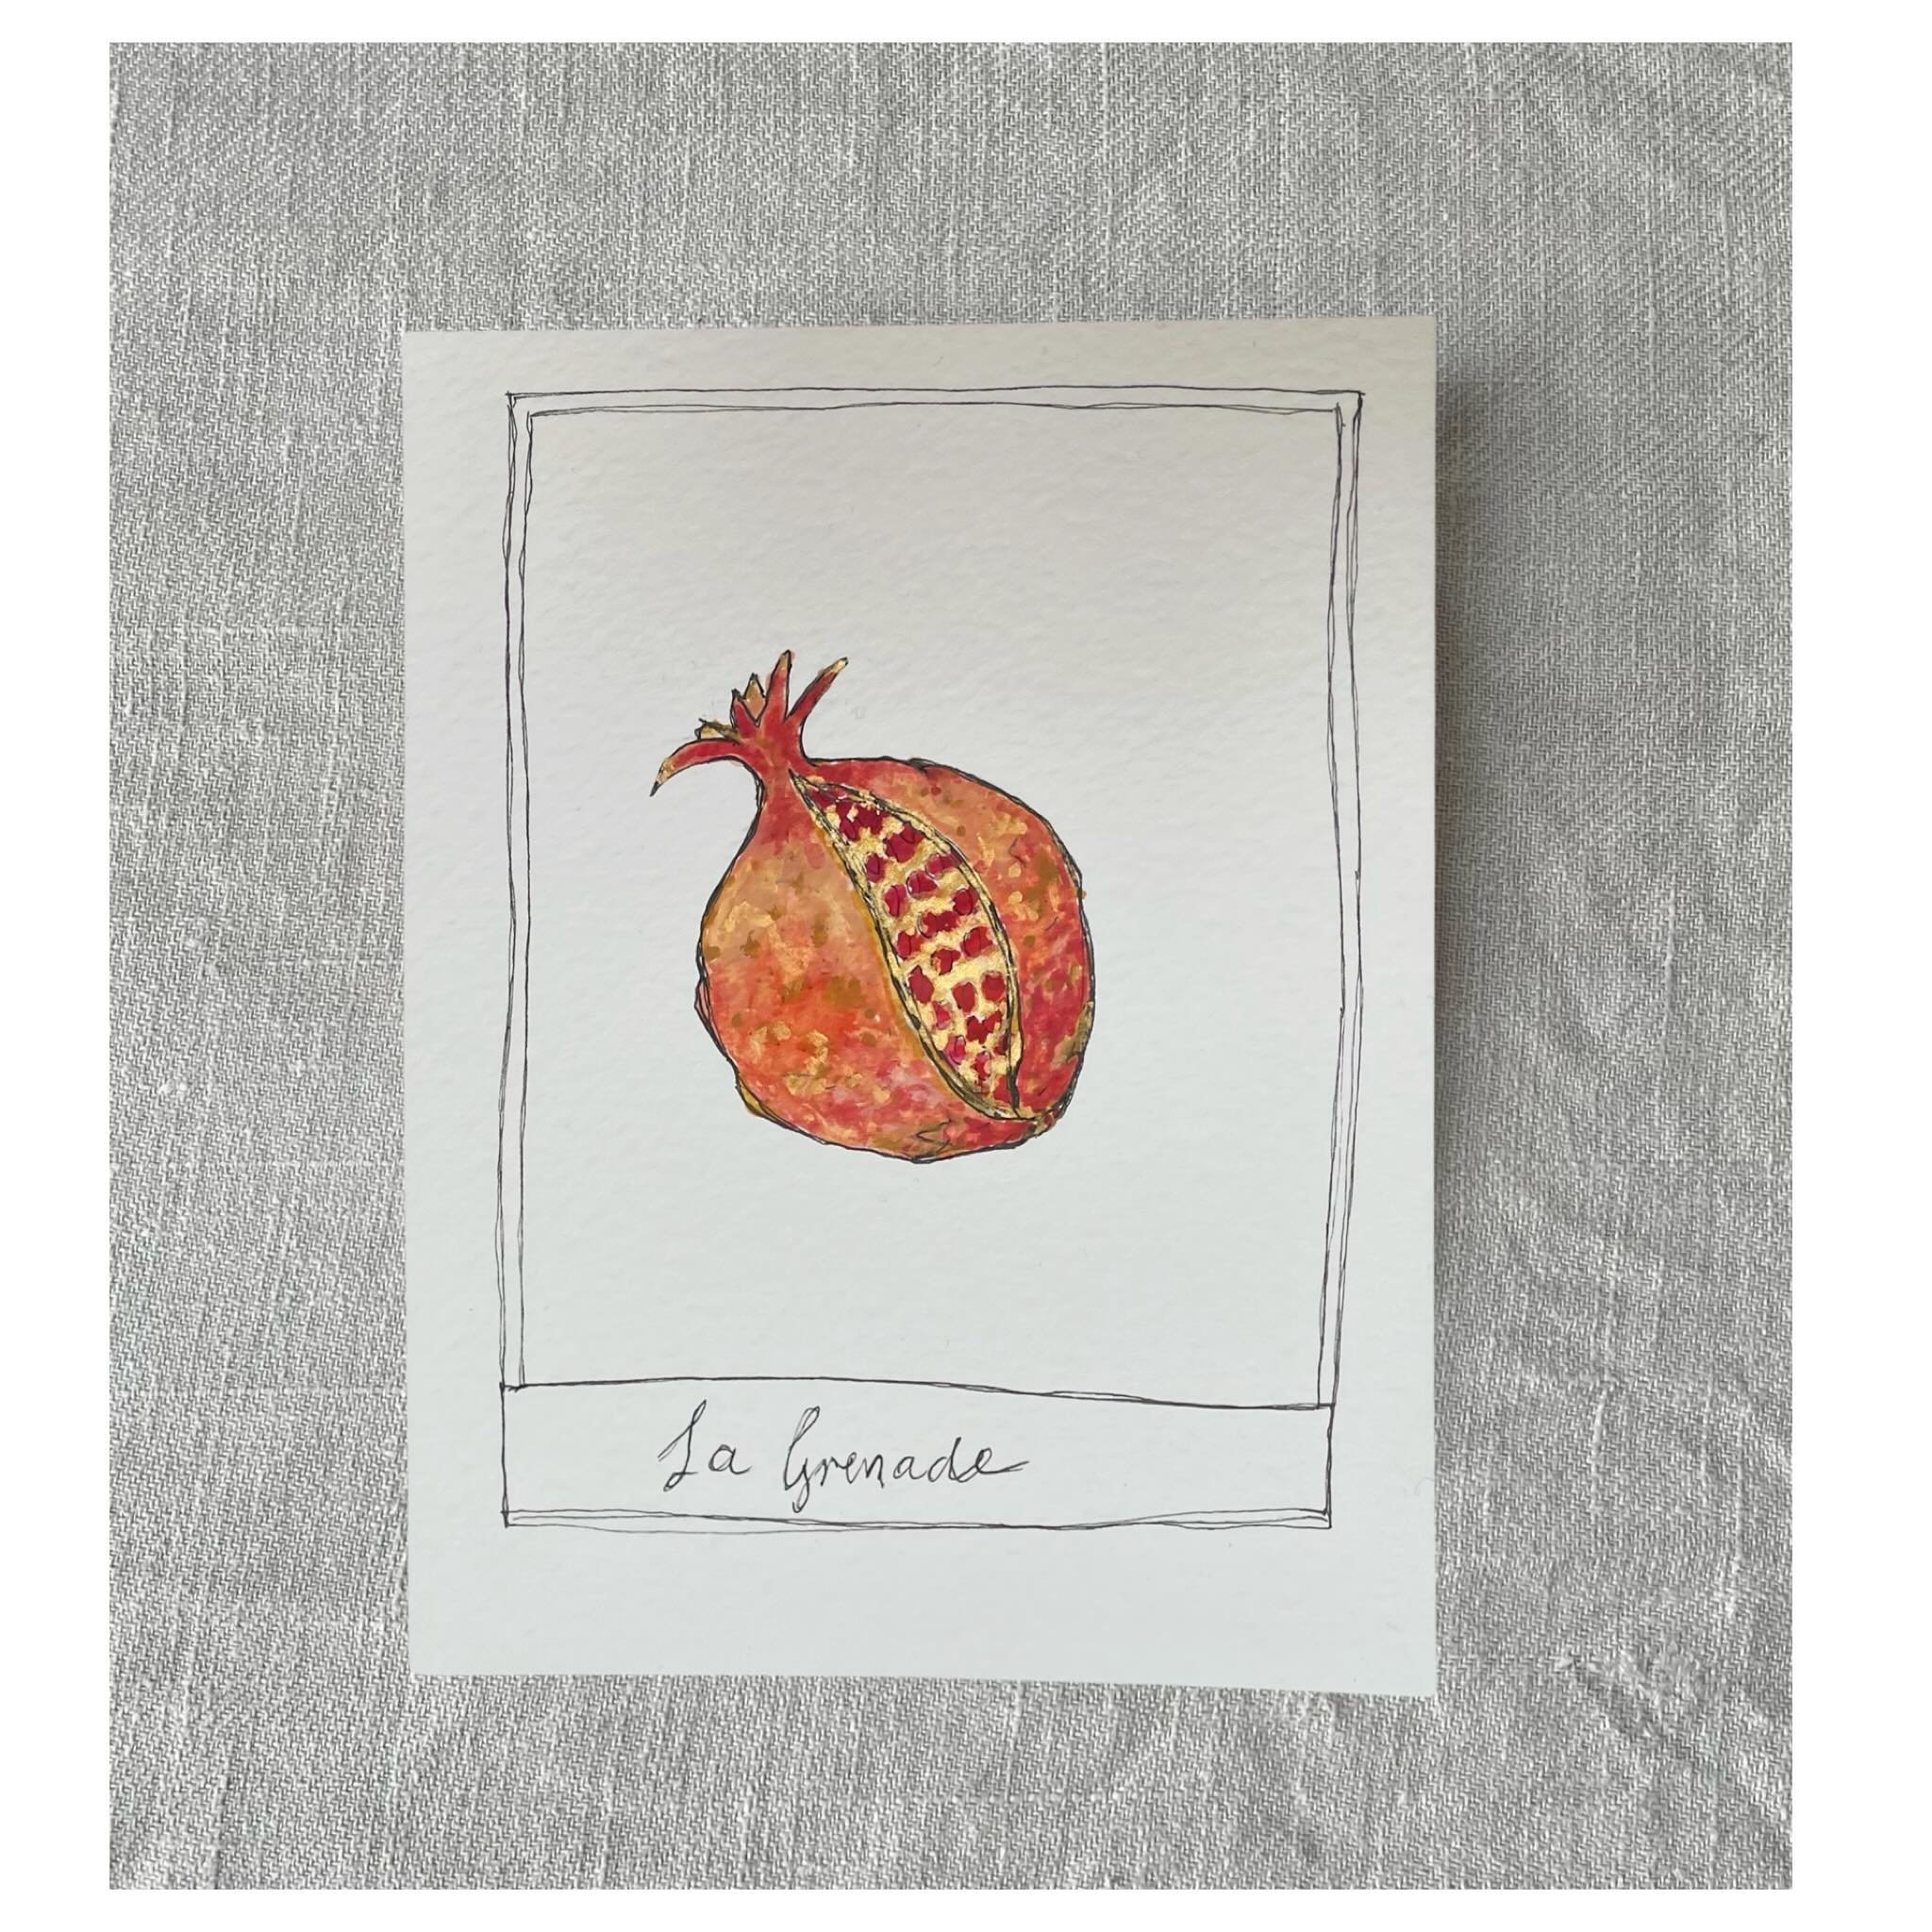 Petite collectables.
La grenade.

This little Pomegranate with its glimmer is up and ready to warm your walls.
The idea with these Petite collectables , is that you can gather them into a display of Provence souvenirs. 
I have more on the way. Each o